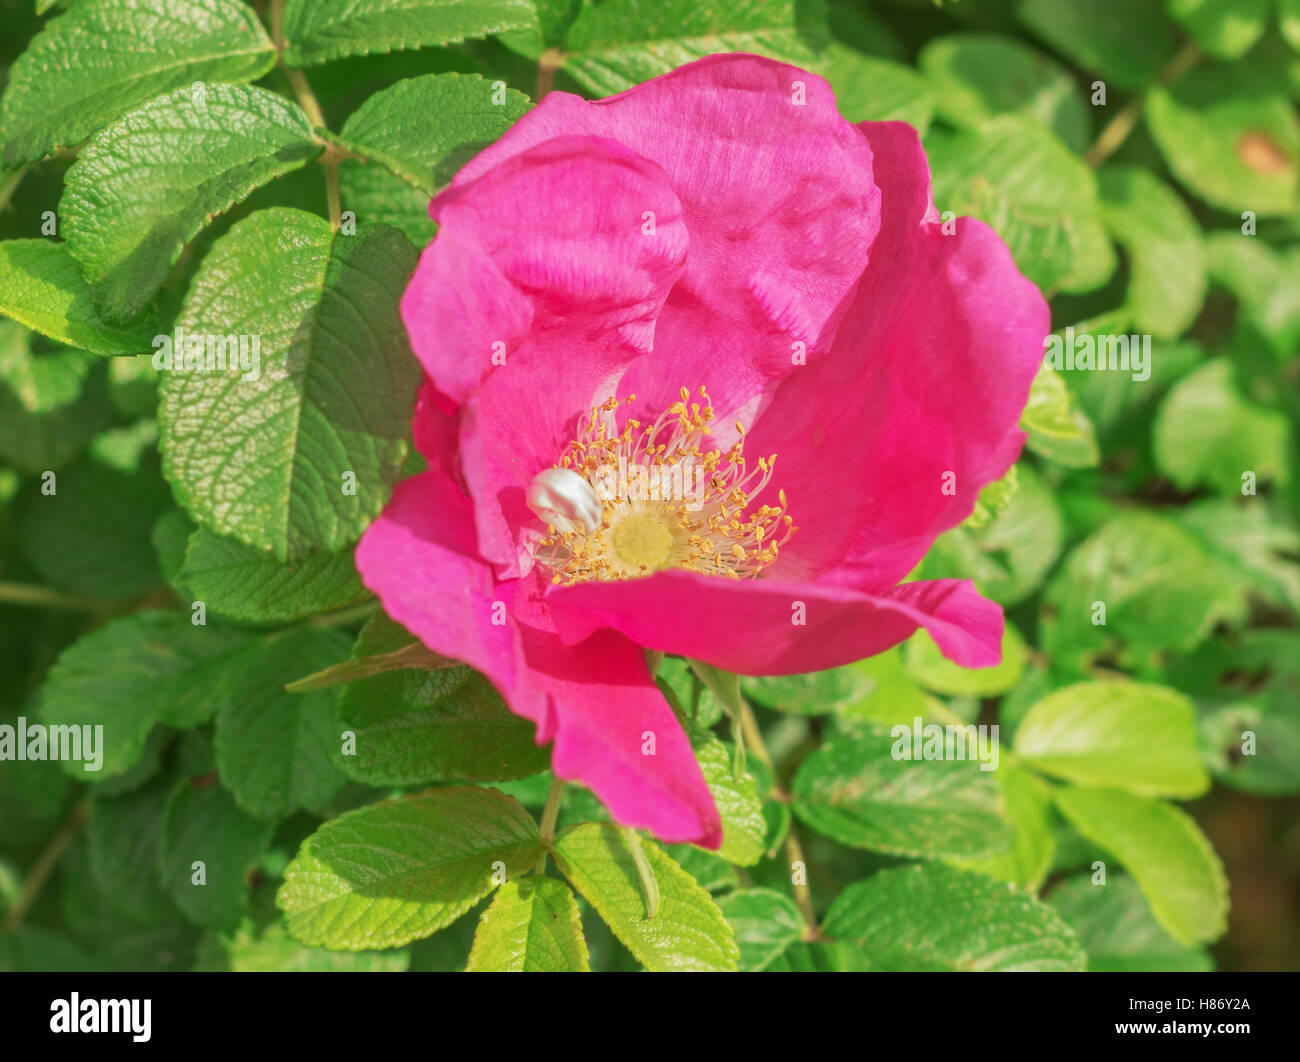 Large flower wild rose at summer sunny day in garden Stock Photo